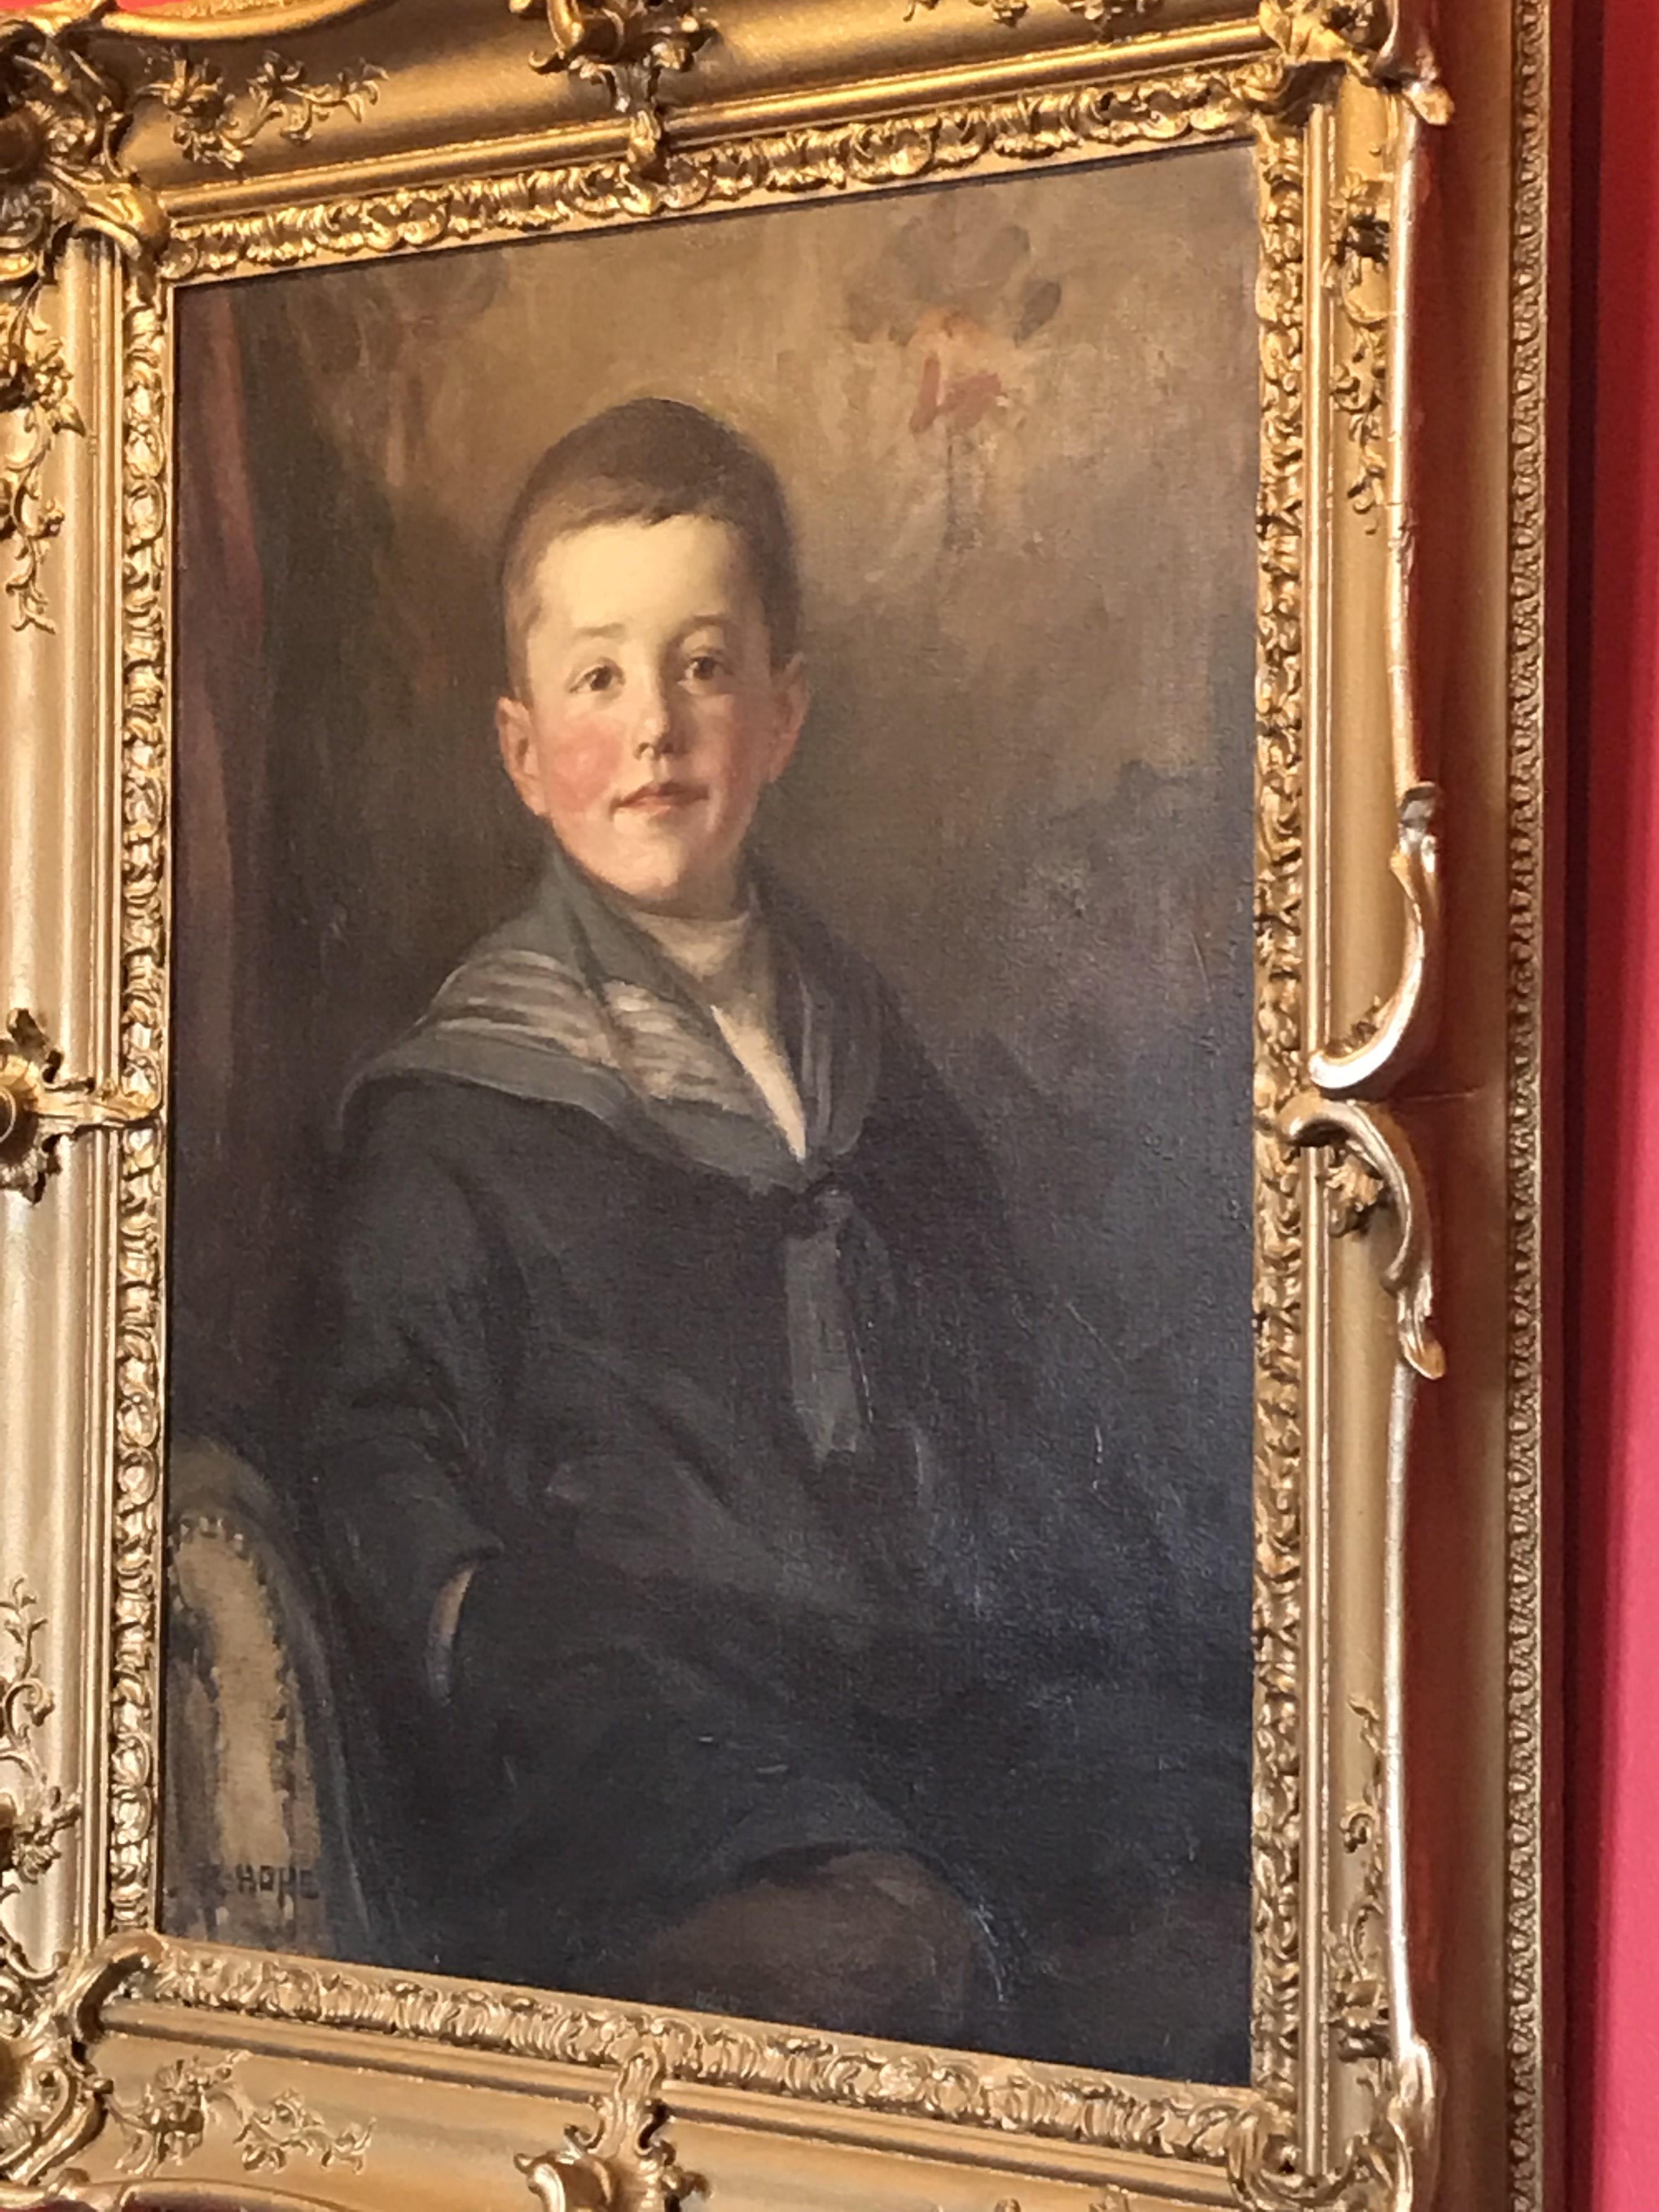 Portrait of a boy, by Scottish artist Robert Hope,1869-1936 exhib R.A, R.S.A, R.S.W - Image 4 of 5